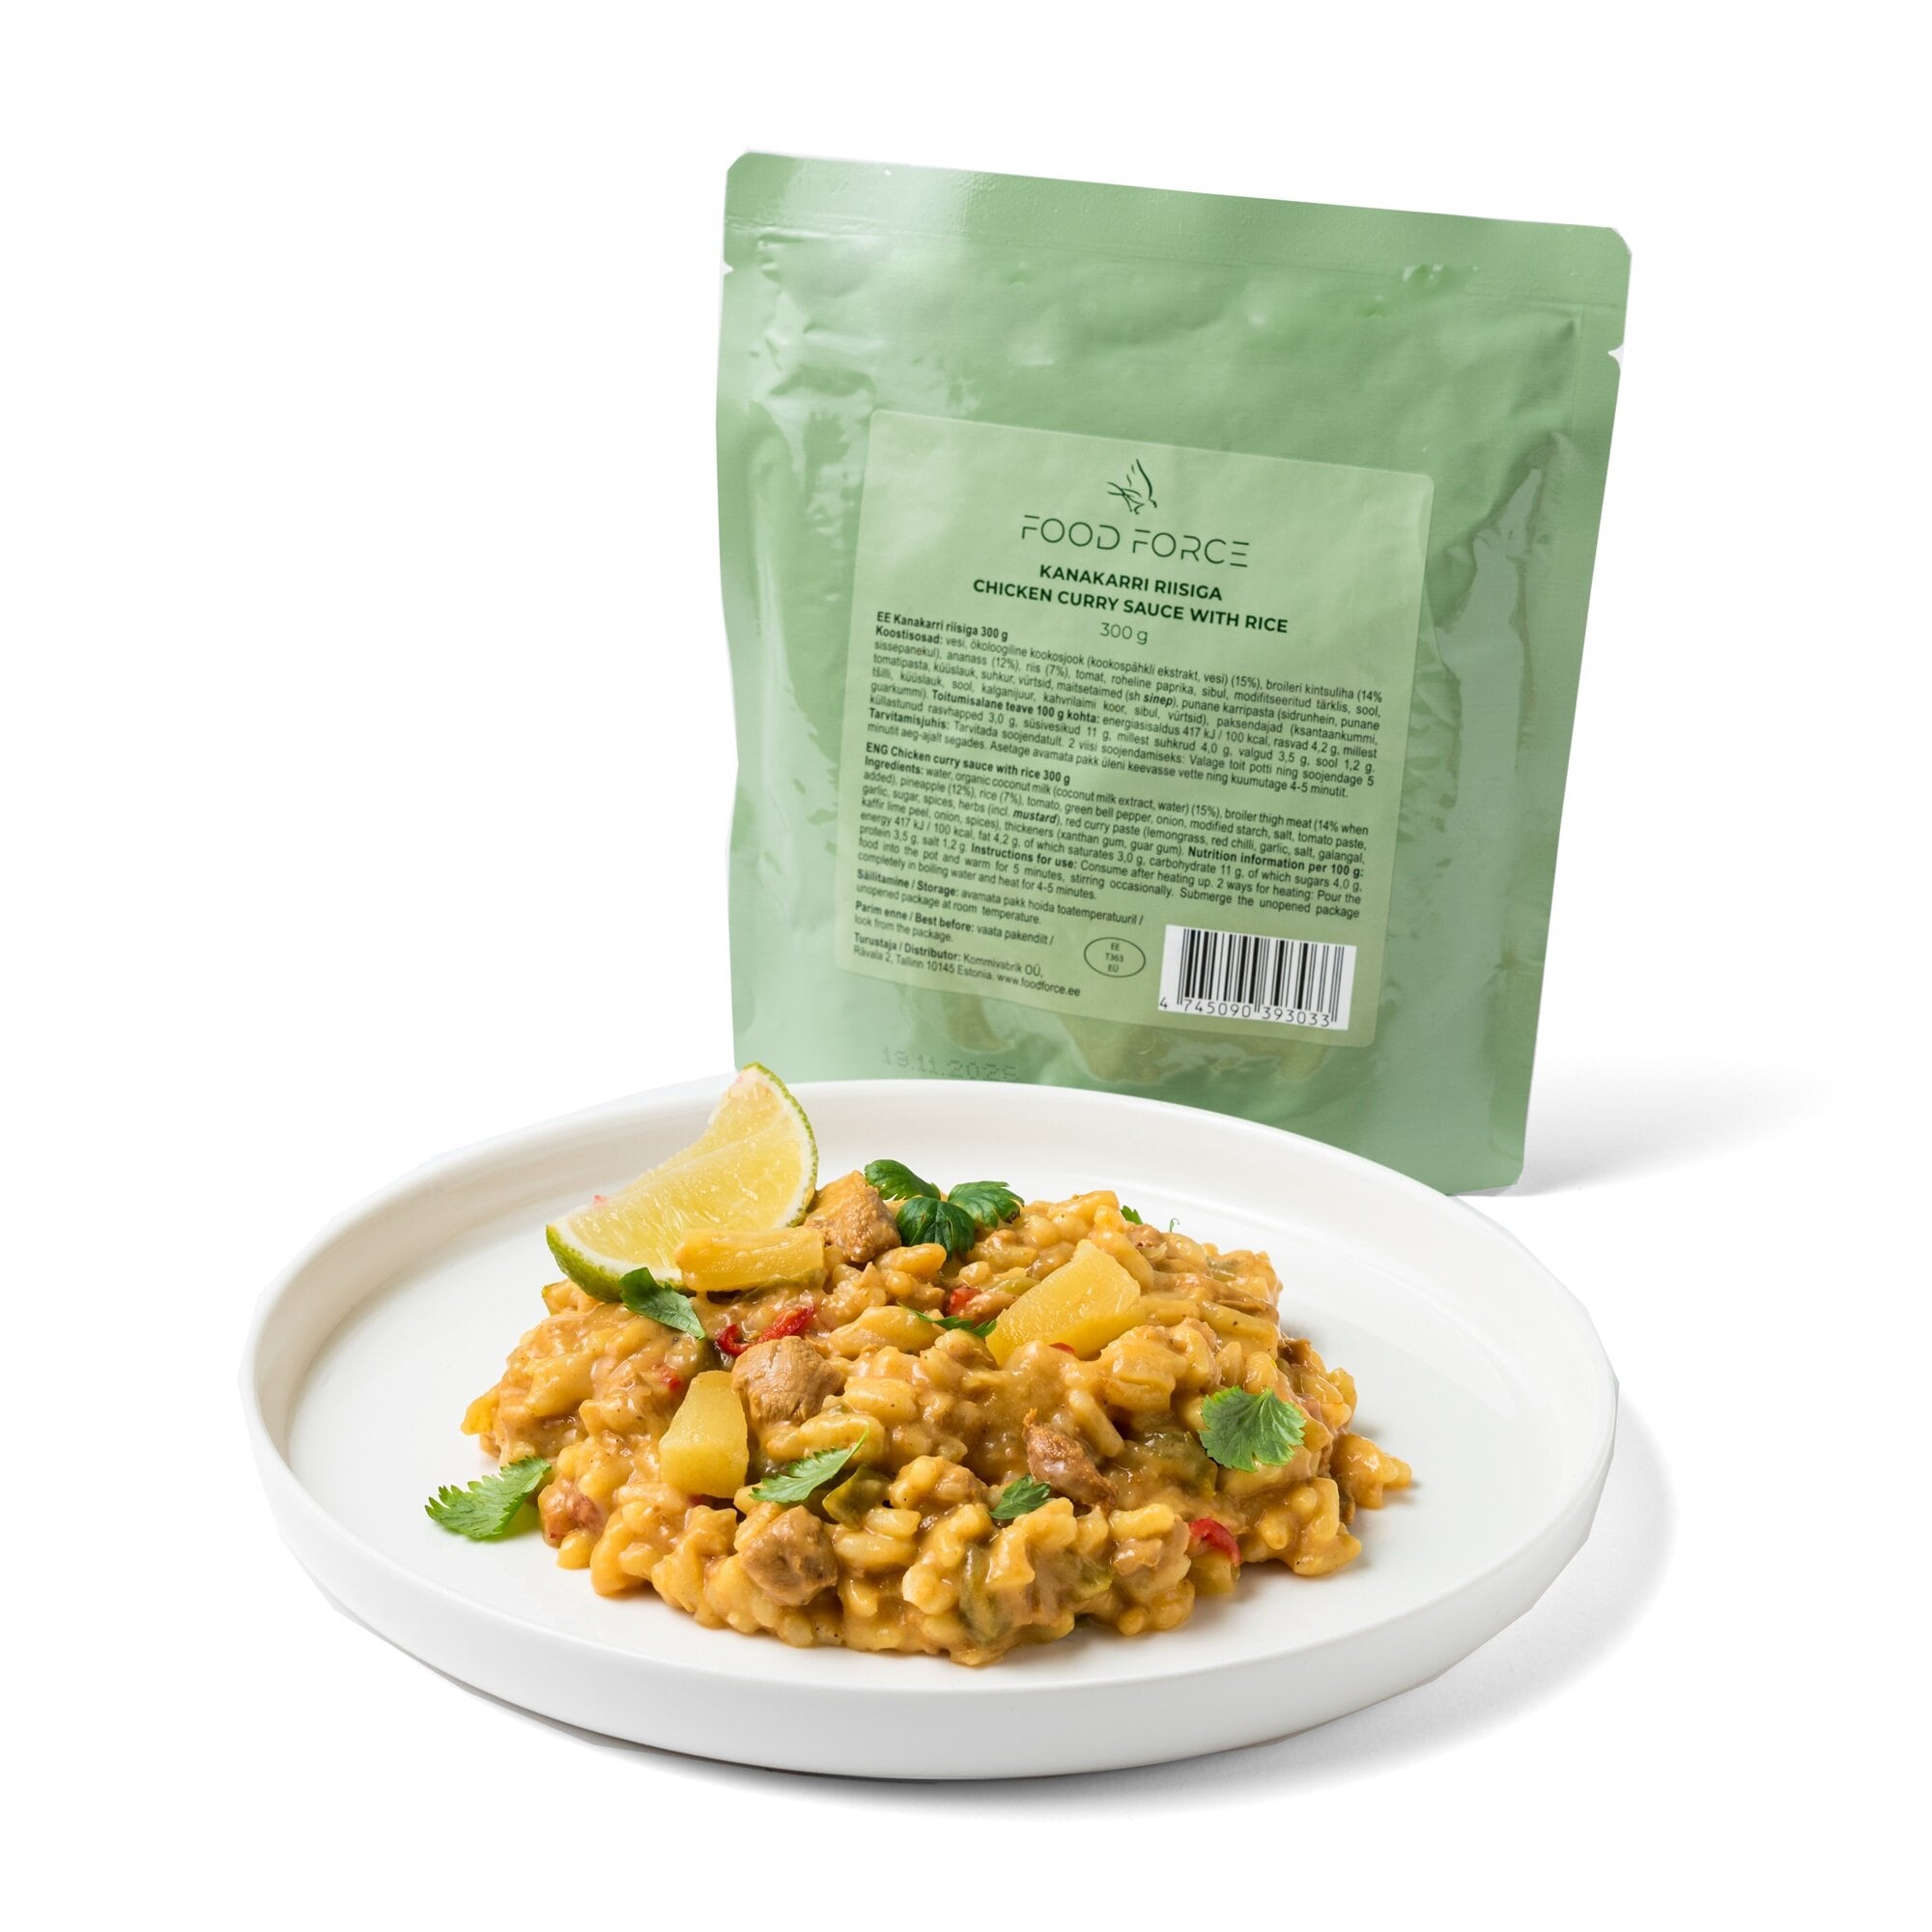 Food Force Chicken curry sauce with rice - Wet Pouch